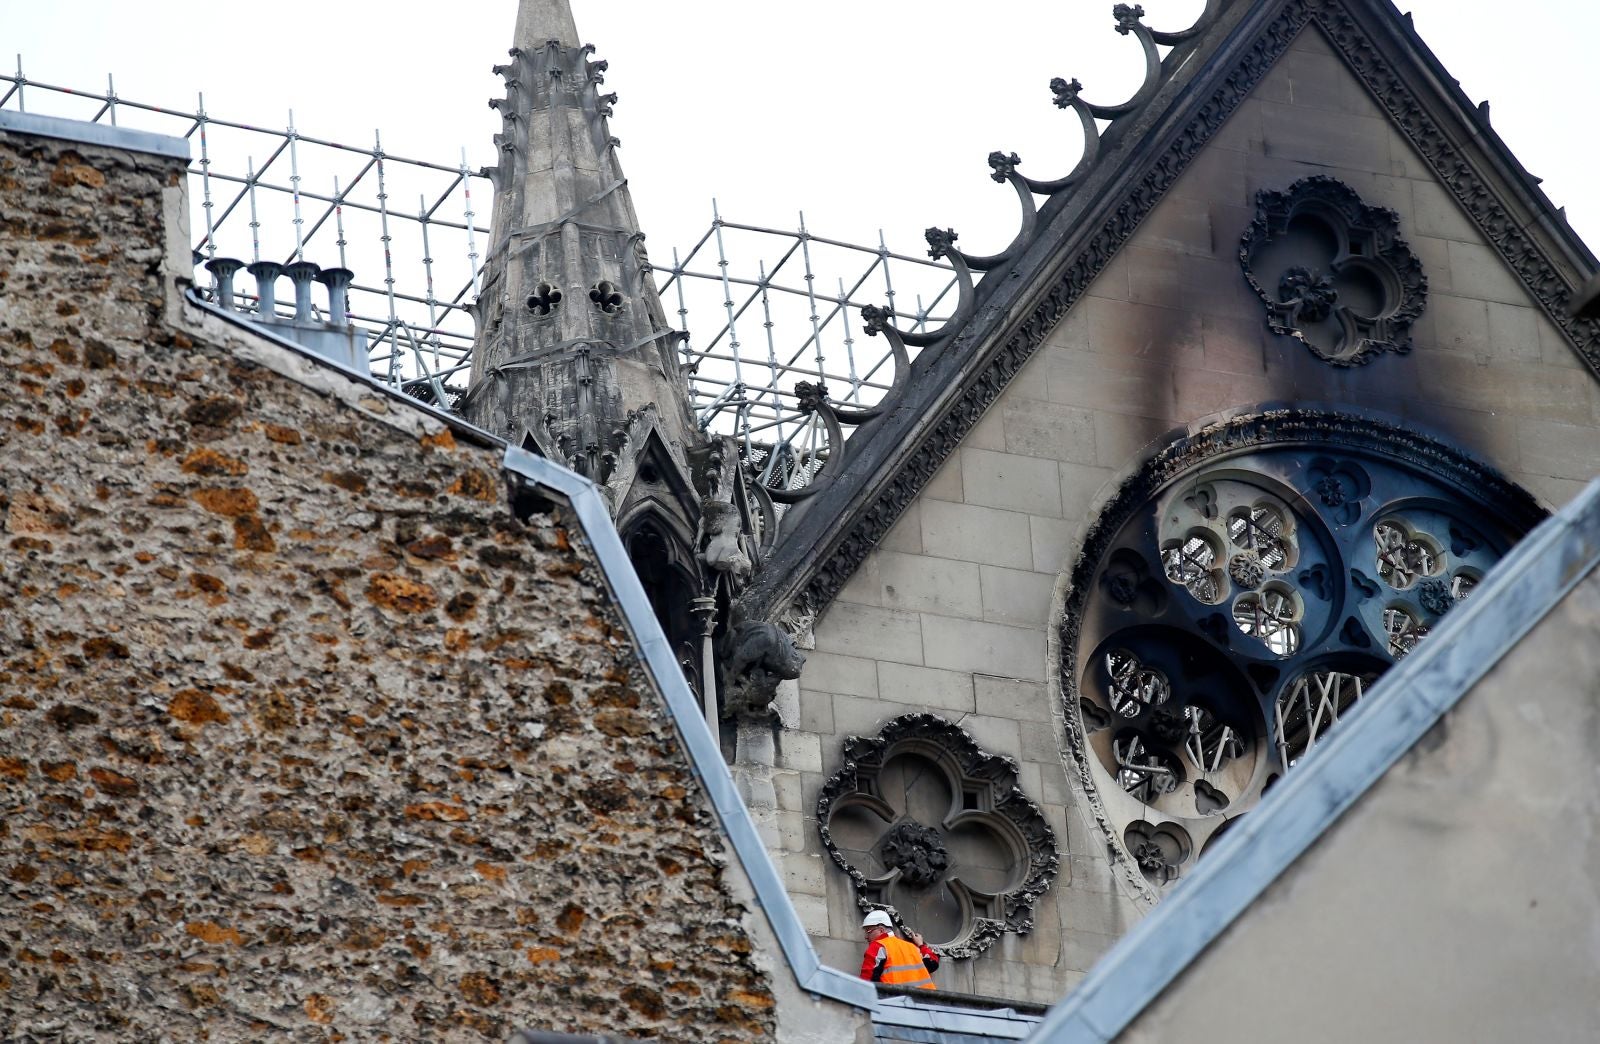 Newly Released Photos Show The Inside of Notre Dame Cathedral After The Fire - WORLD OF BUZZ 1